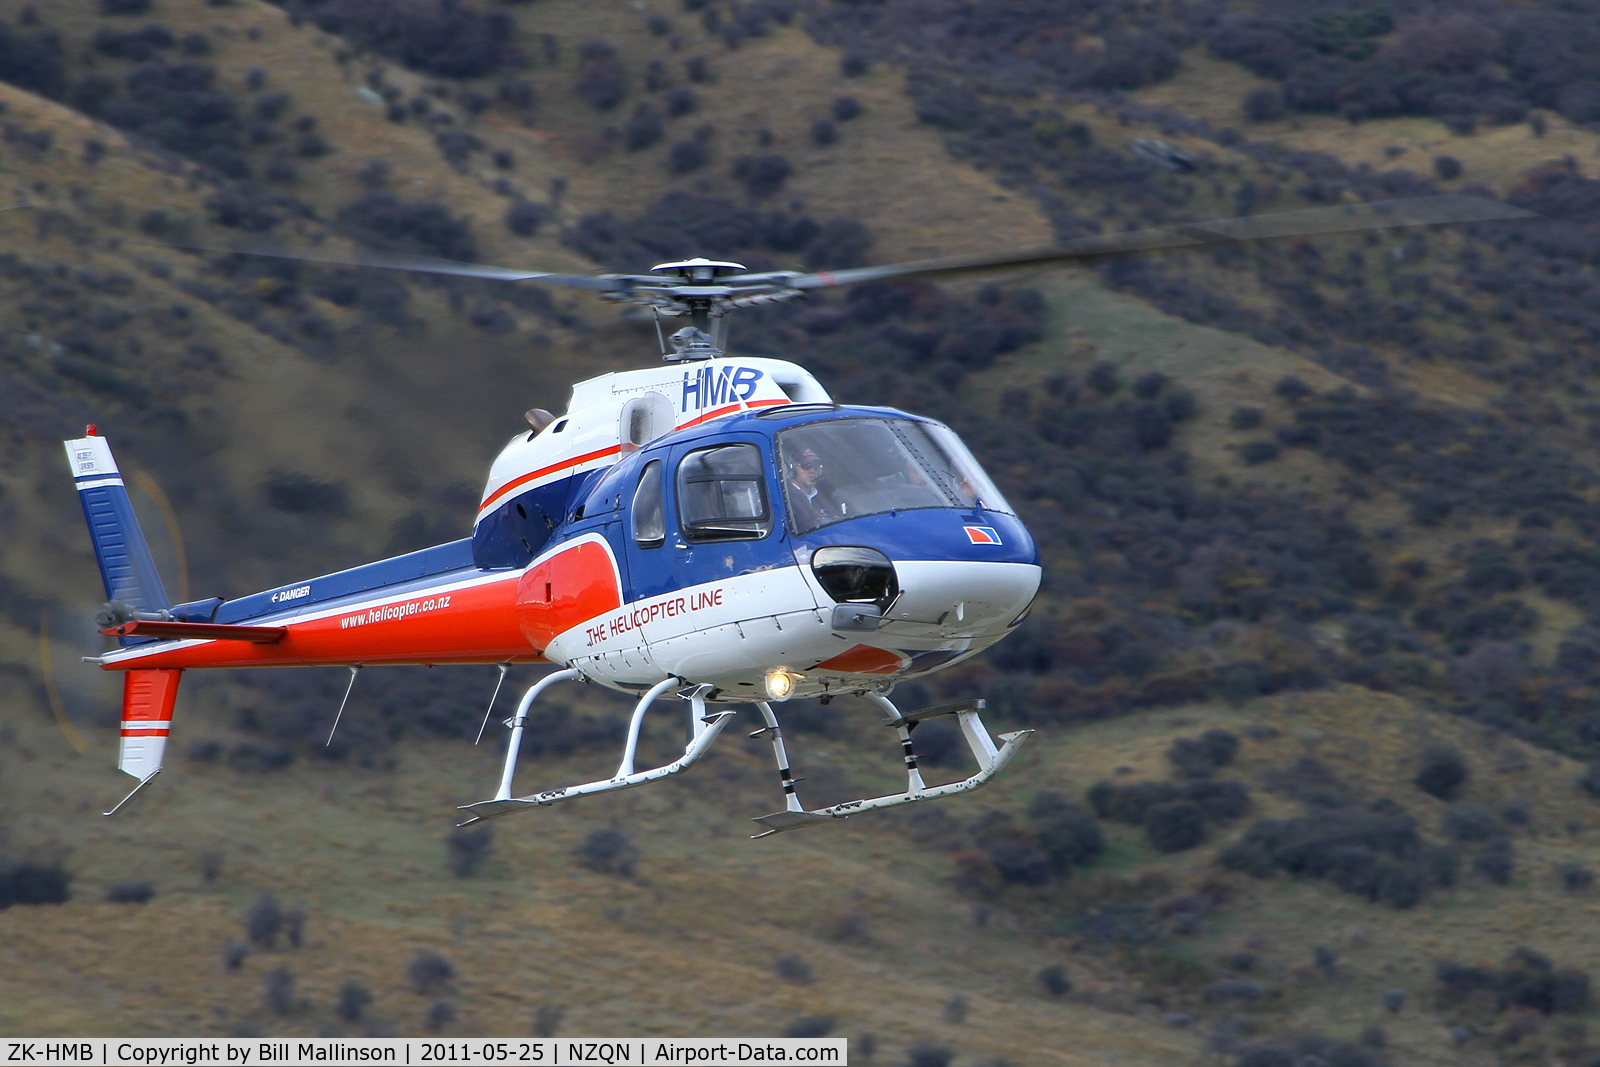 ZK-HMB, Aerospatiale AS-355F-1 Ecureuil 2 C/N 5016, bringing tourists back to ground